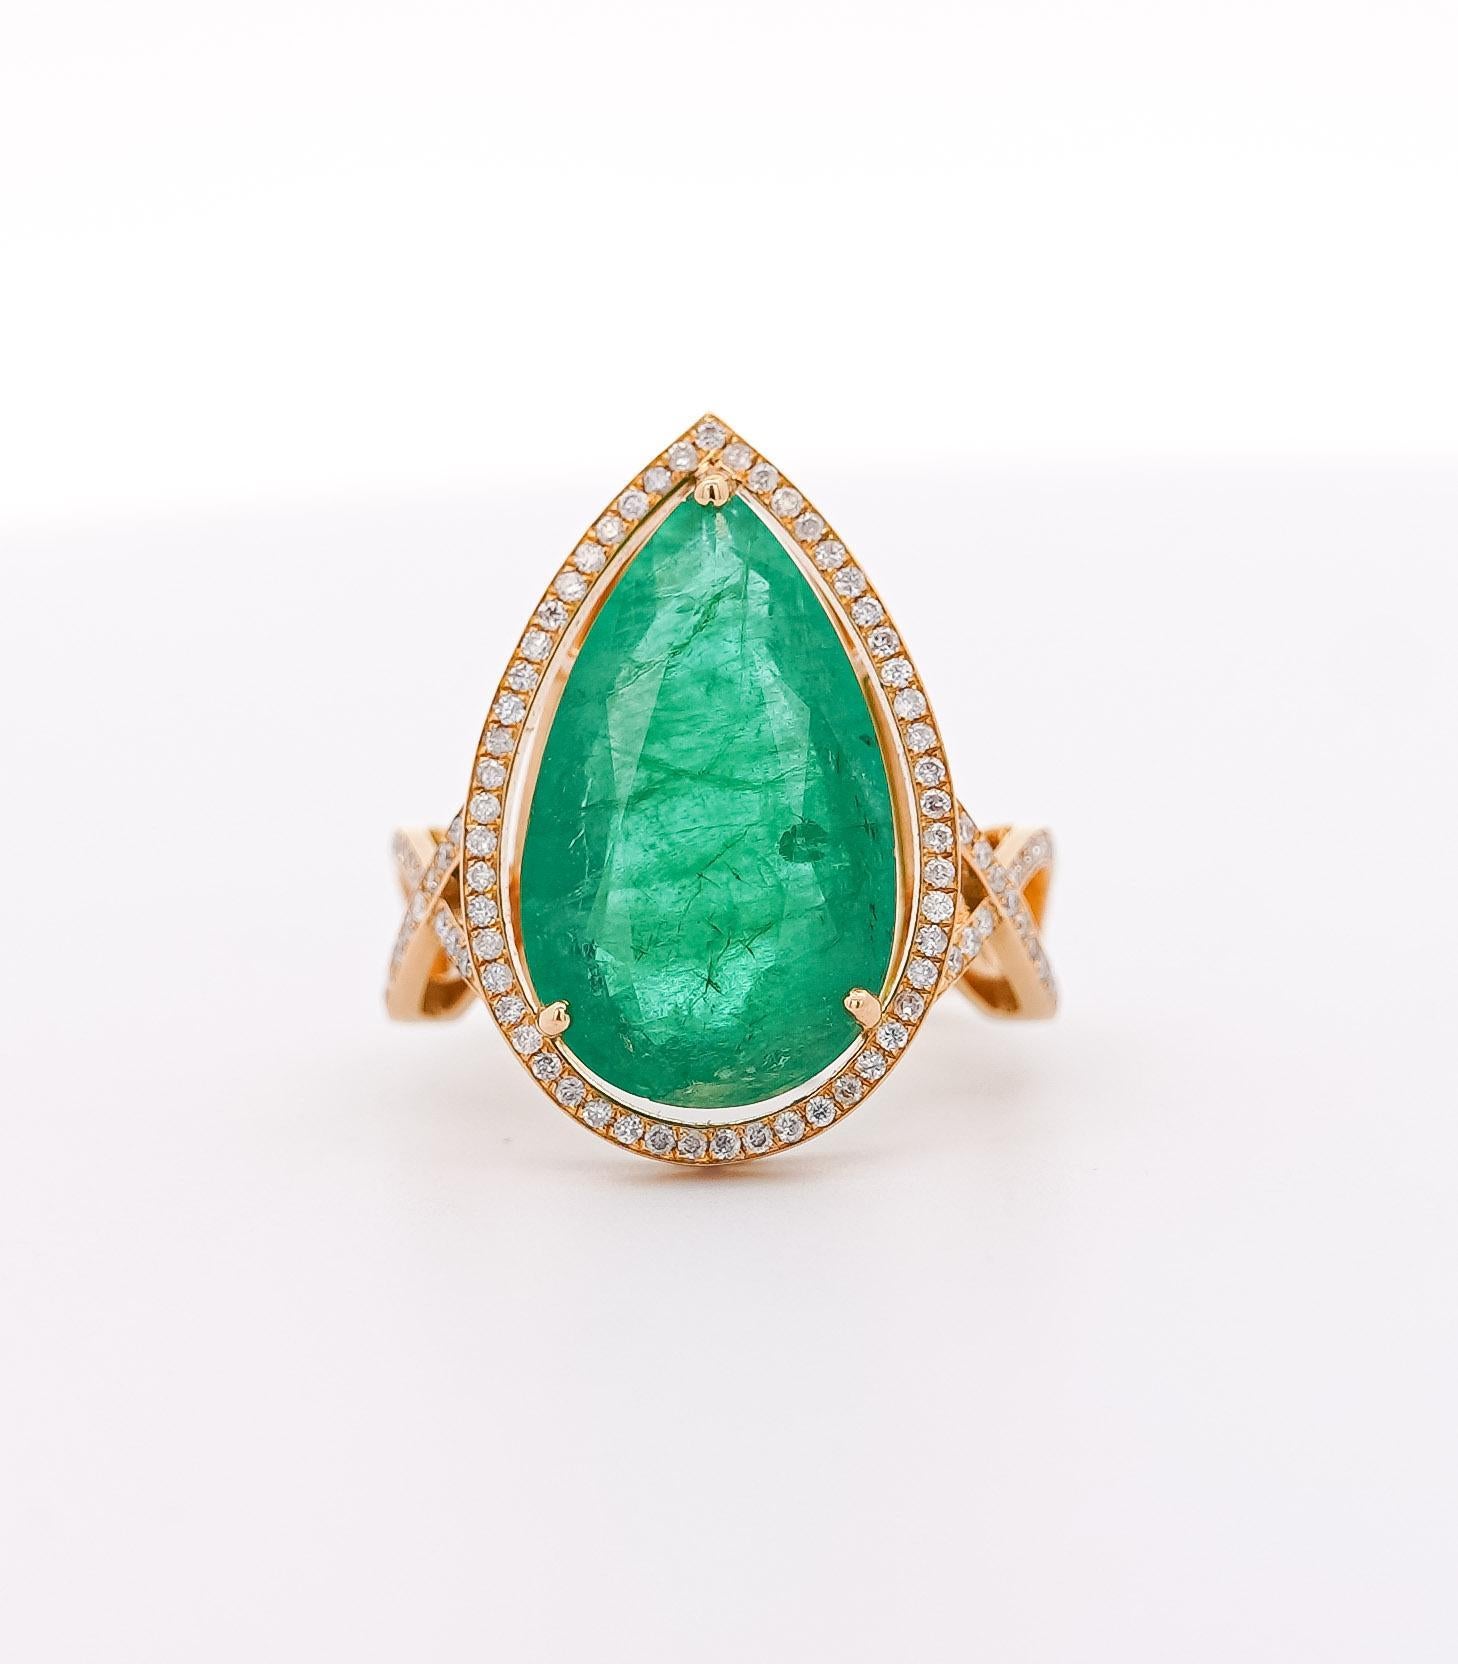 Vintage 9 Carat Zambia Emerald & Diamond Halo Ring with Jacket in 18K Gold. 

This ring is a truly exceptional piece. It features a vibrant green pear-shaped Zambian emerald, weighing 9 carats. It is secured in a prong setting and surrounded by a